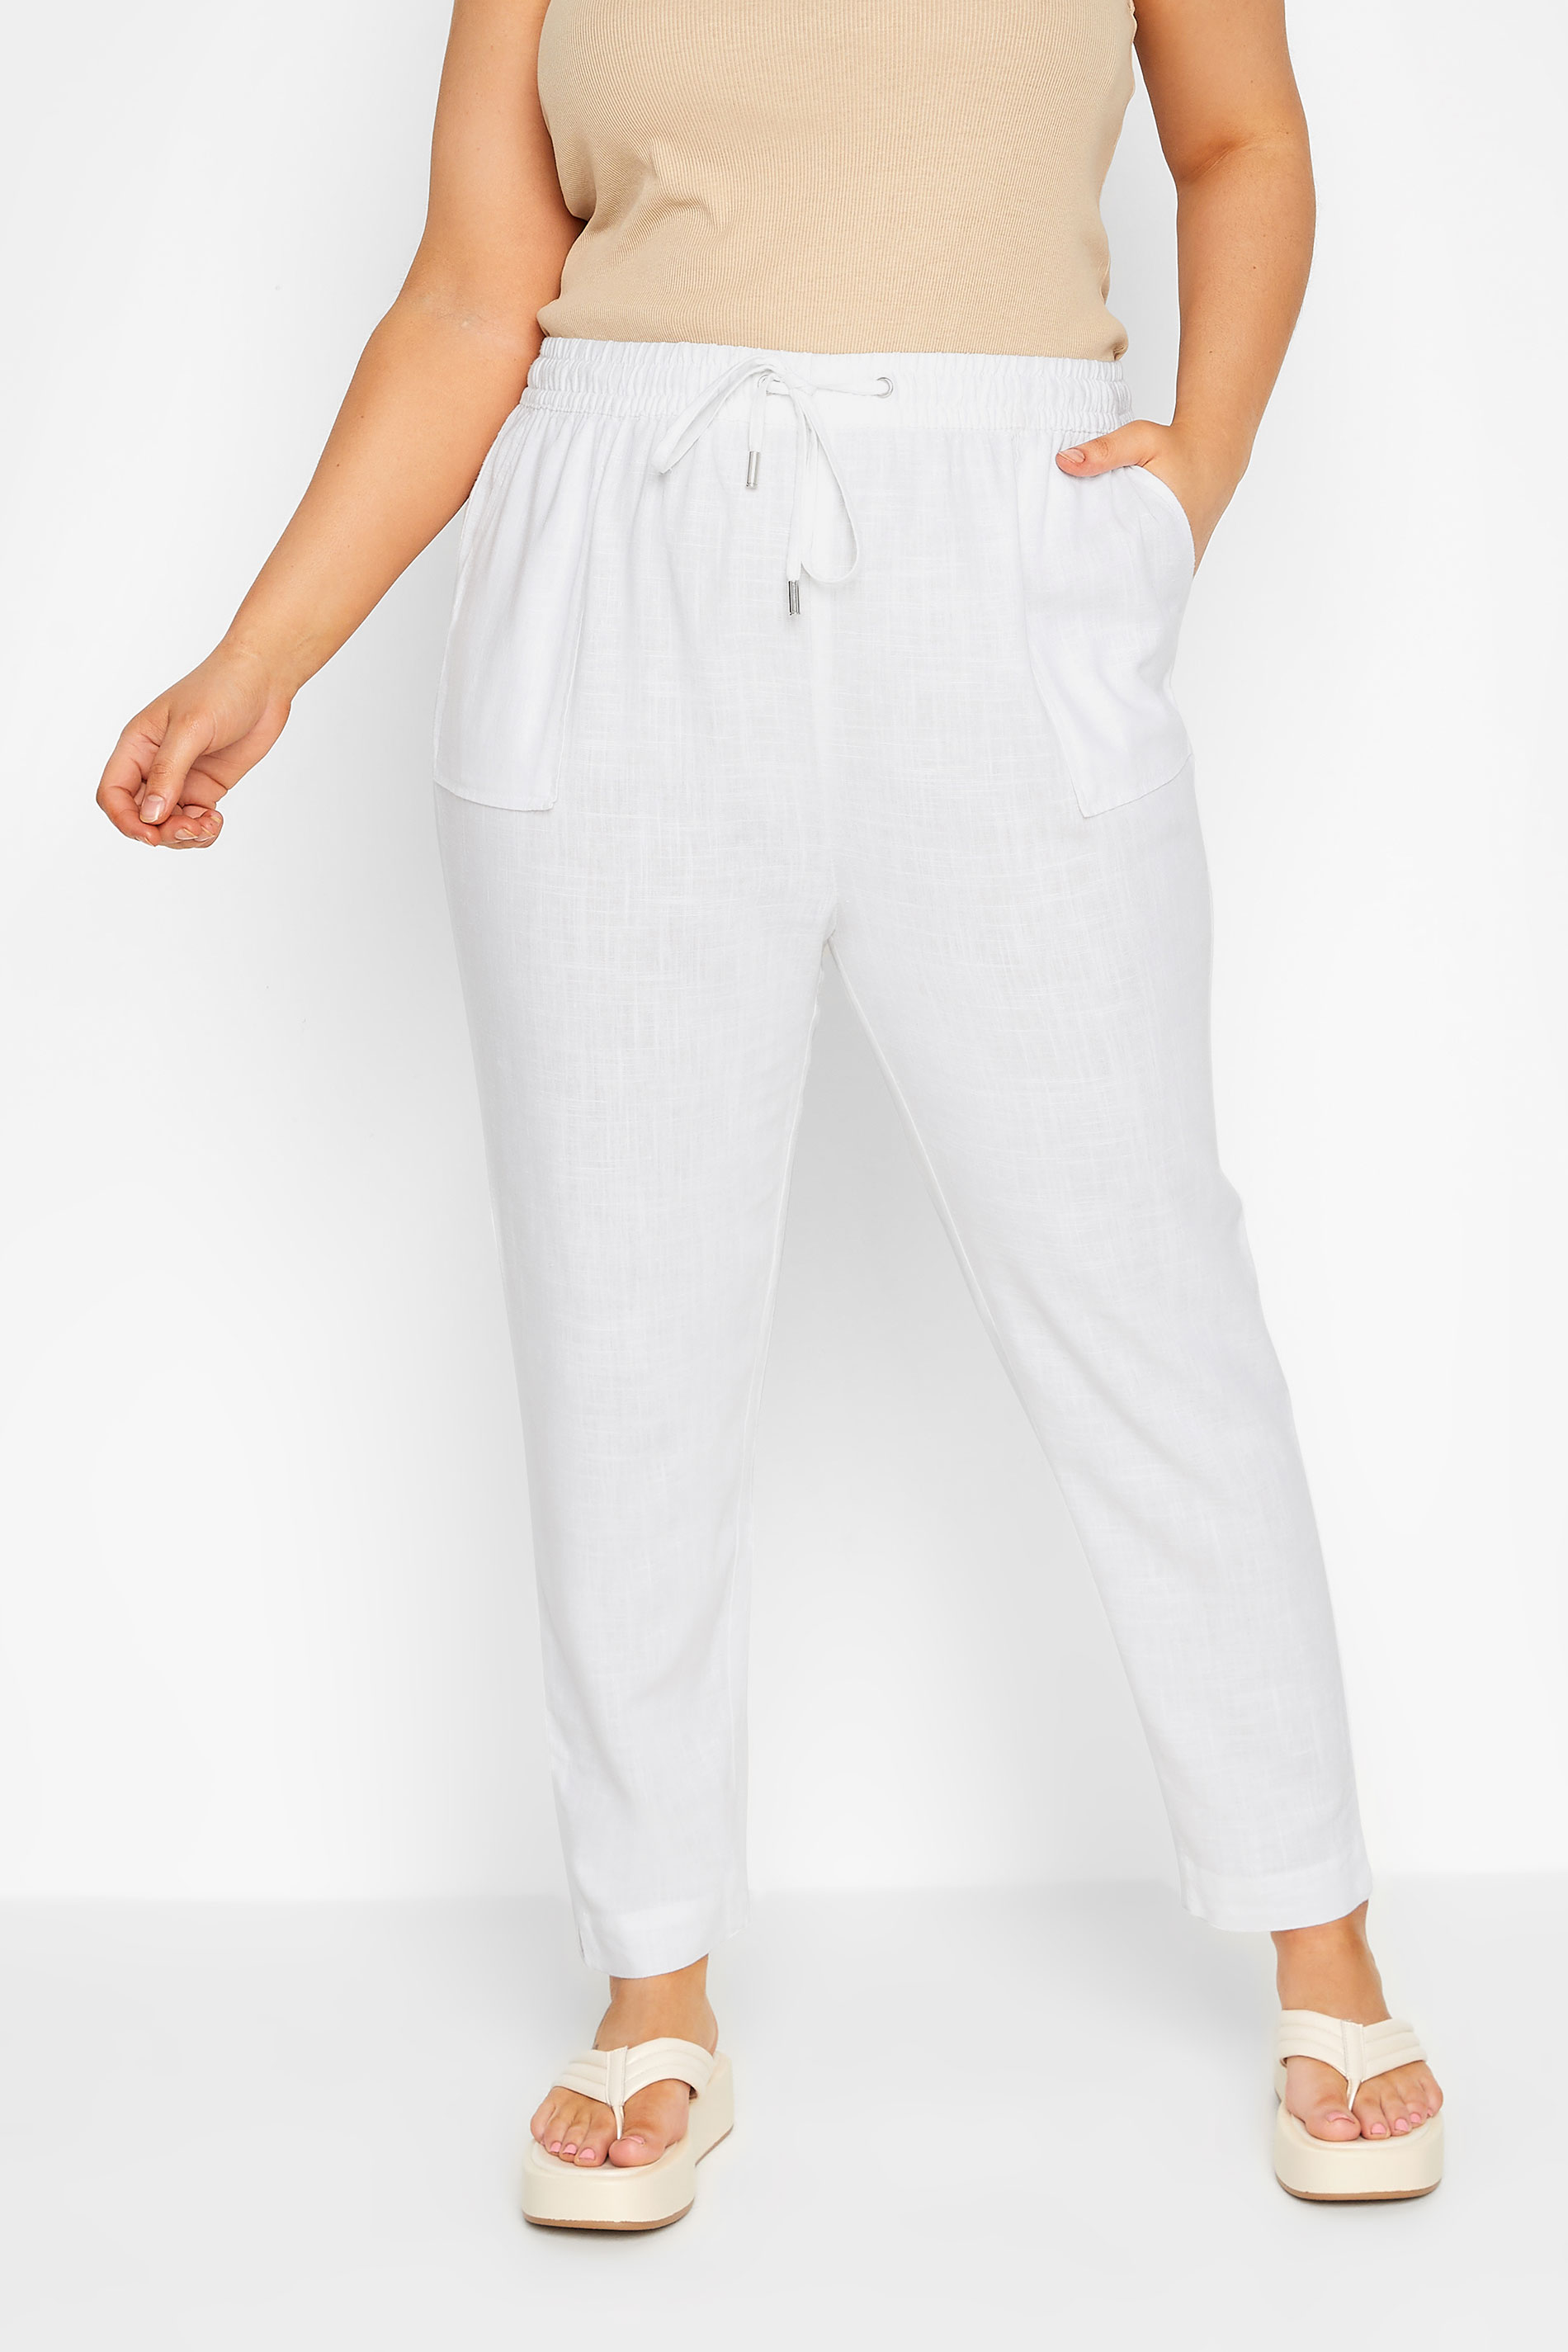 YOURS Curve White Linen Look Joggers | Yours Clothing  1